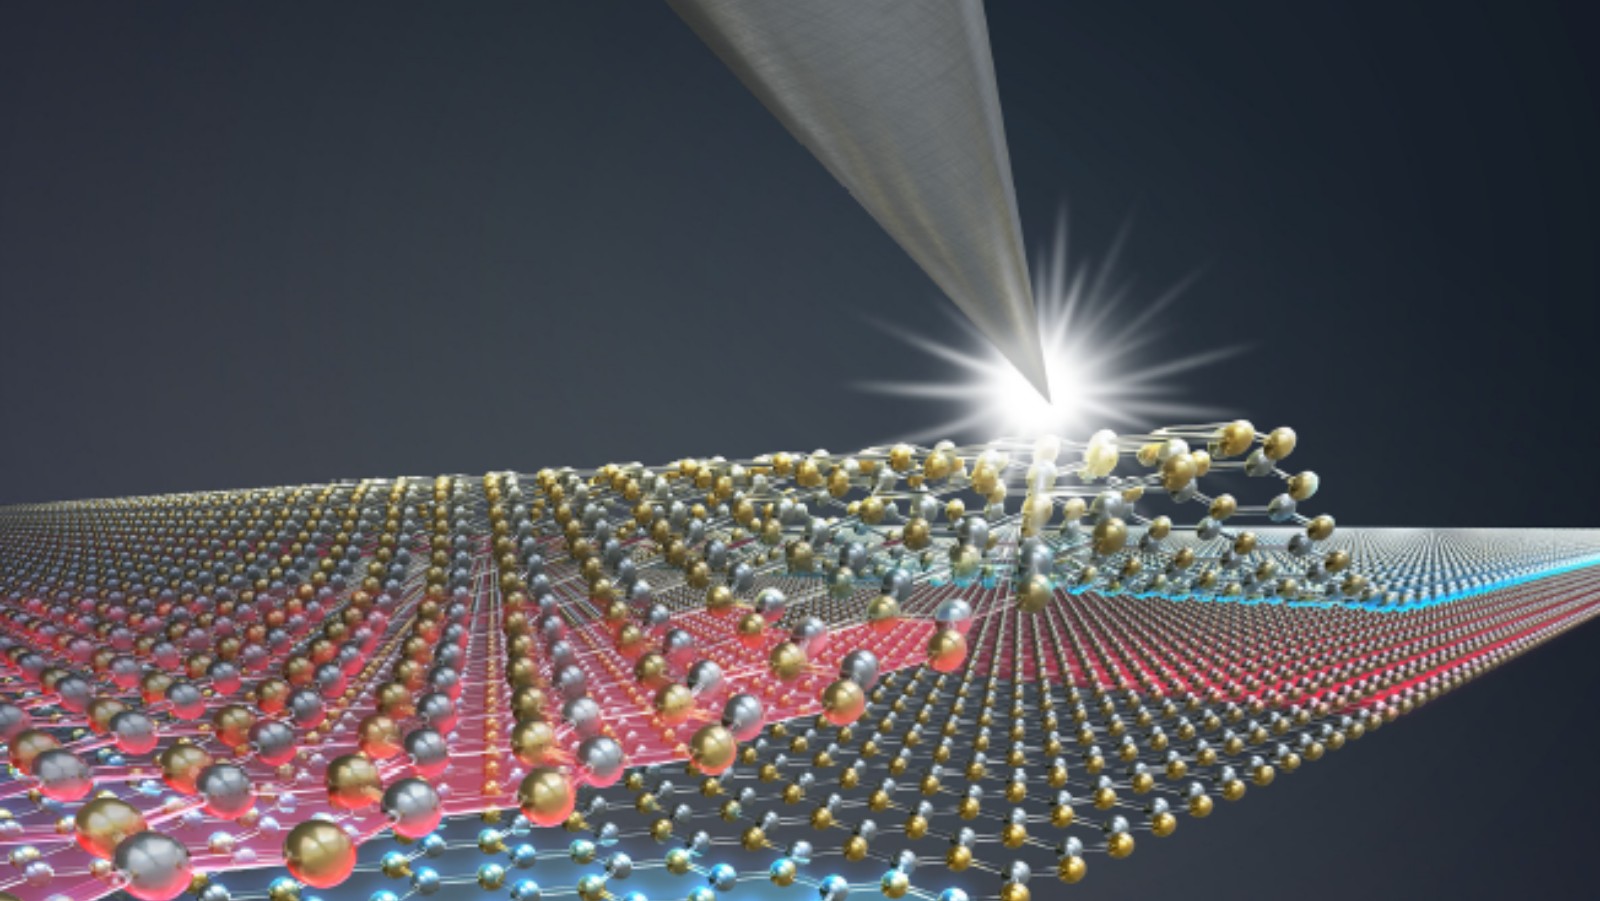 A rendering of the new crystal structure for storing electronic information. Image courtesy of Tel Aviv University